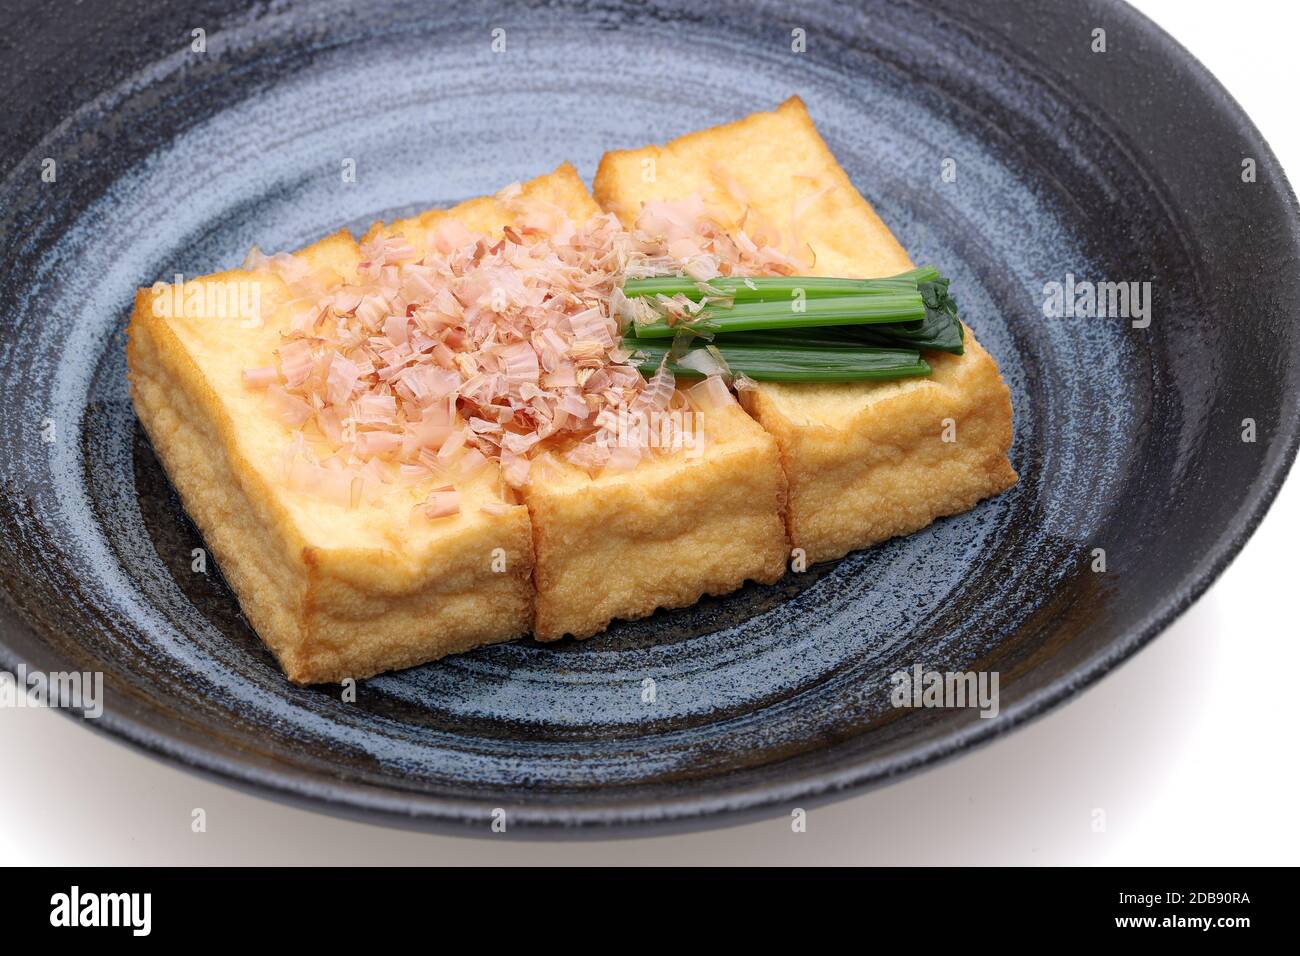 Japanese food, Age tofu cuisine in a dish on white background Stock Photo